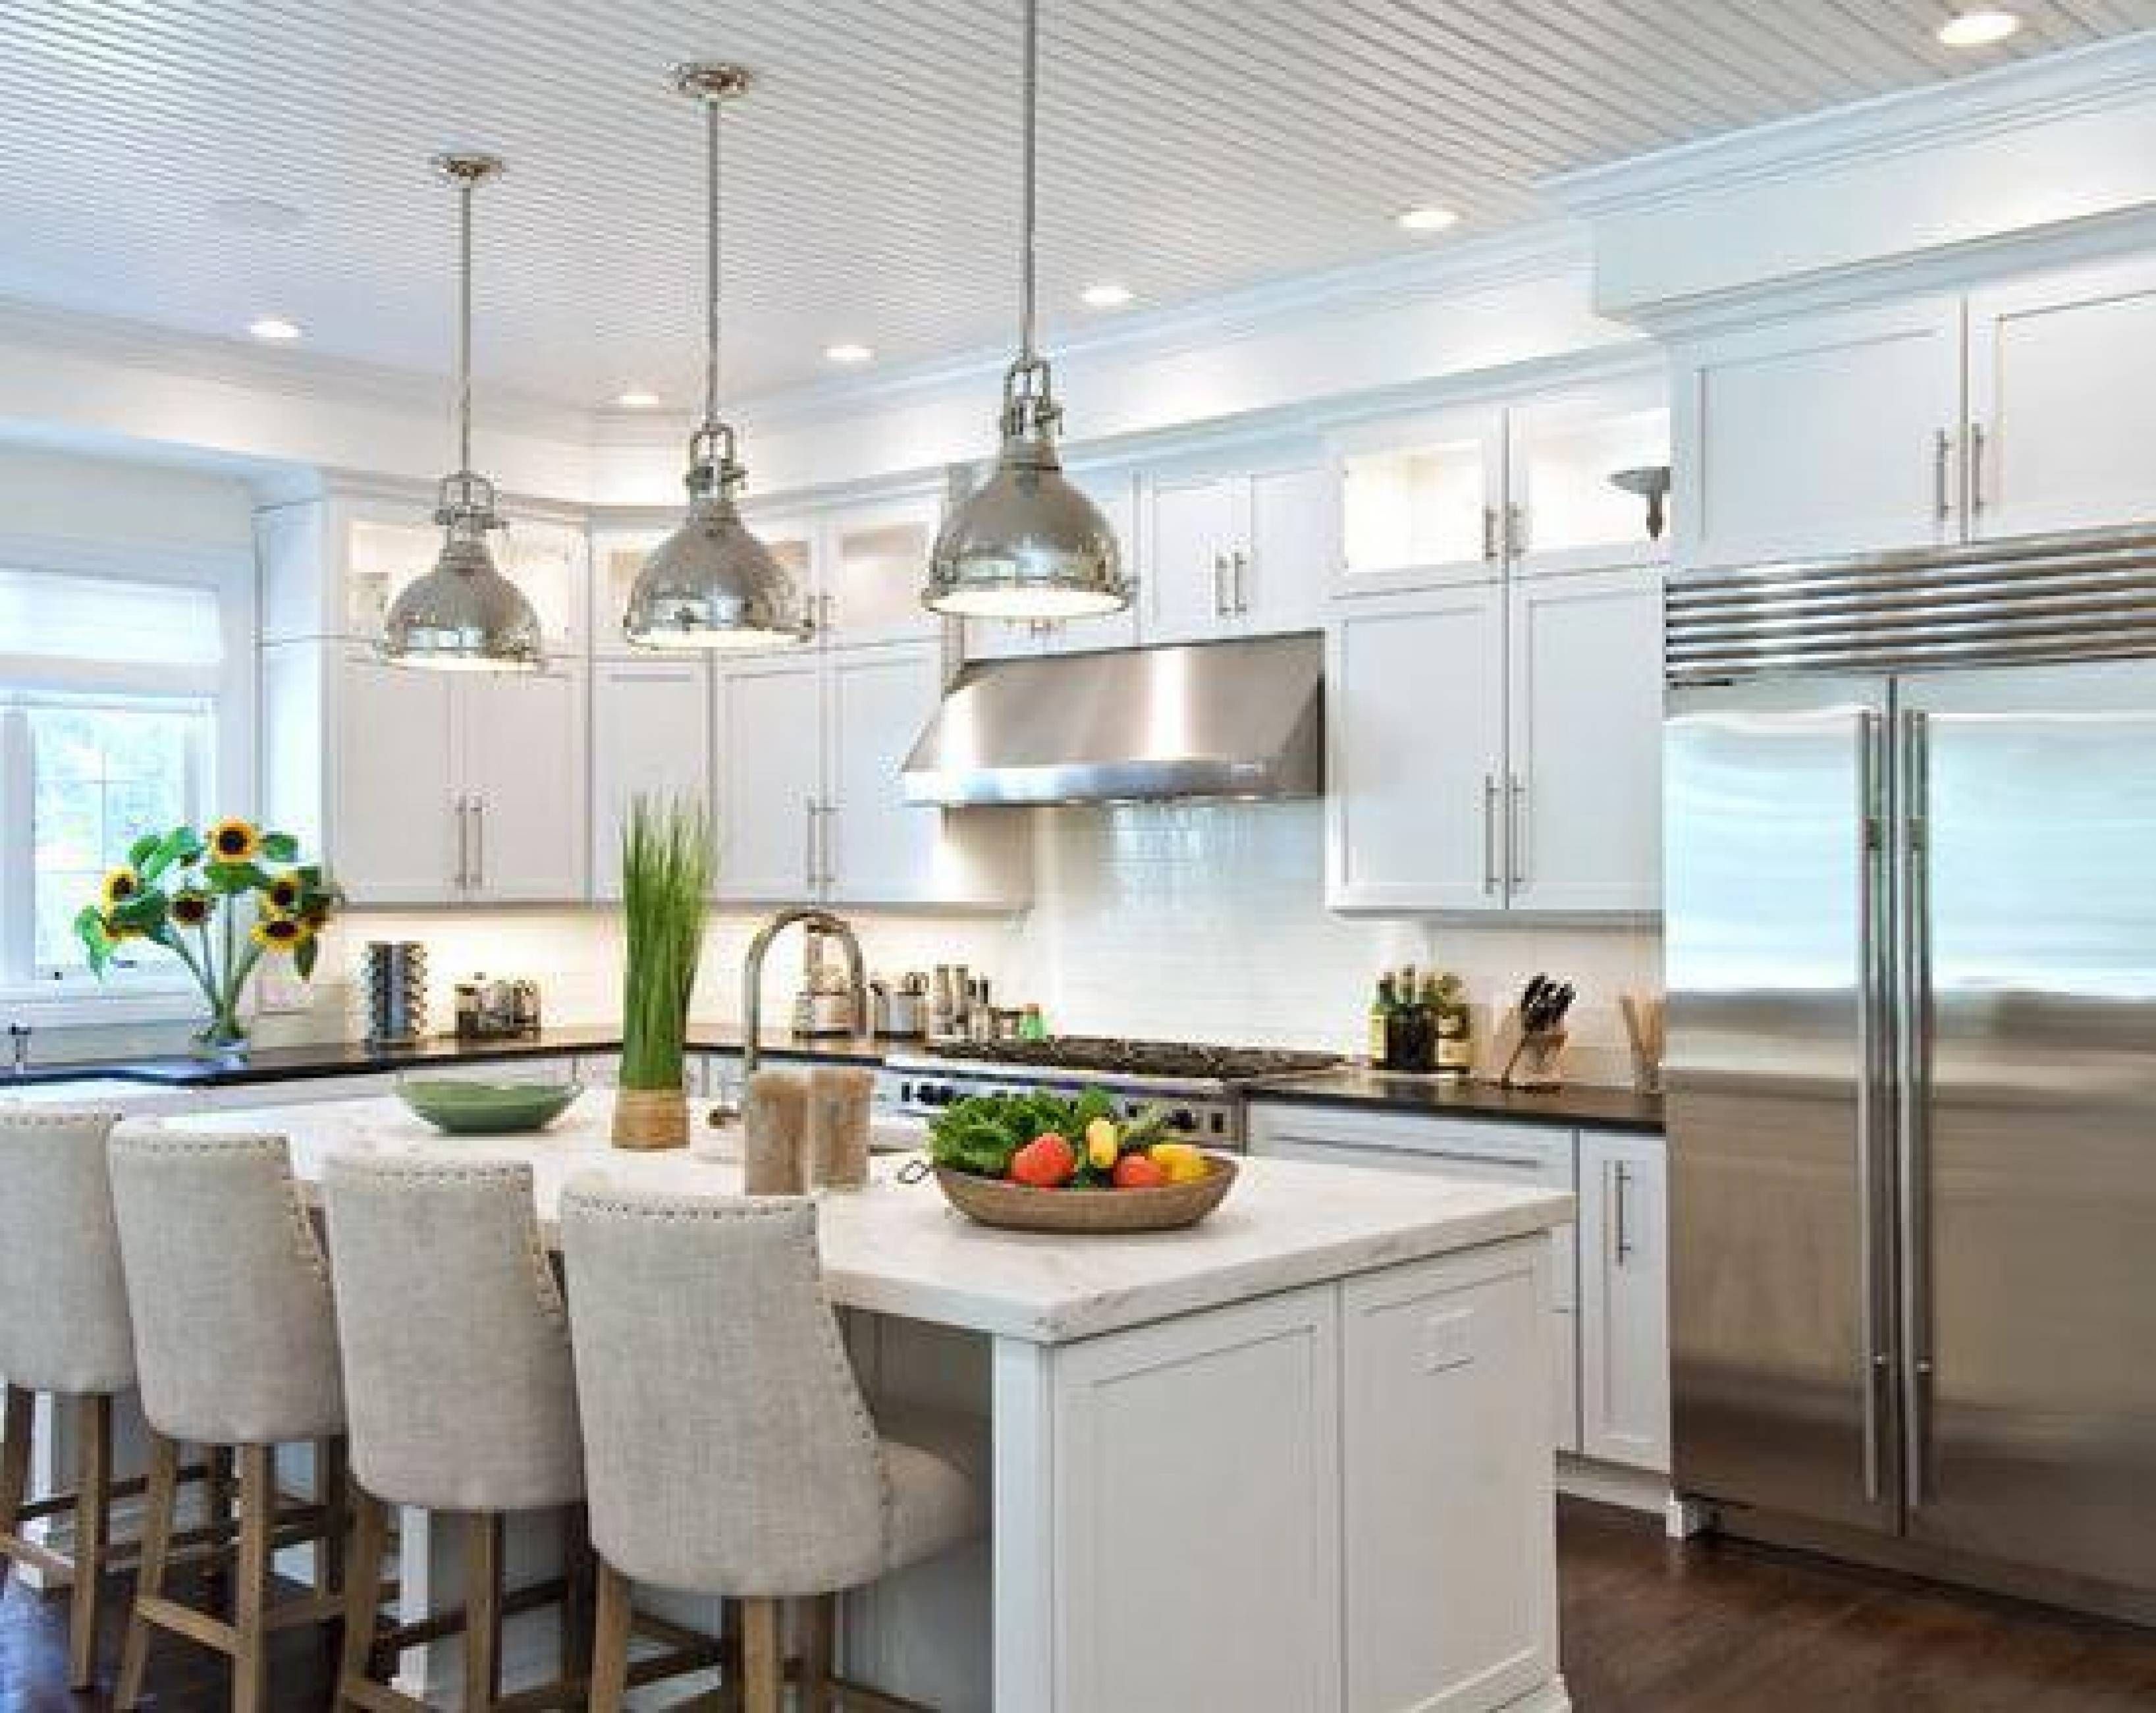 Lovable Lighting Pendants Kitchen Pertaining To Home Remodel Ideas In Country Pendant Lighting For Kitchen (View 7 of 15)